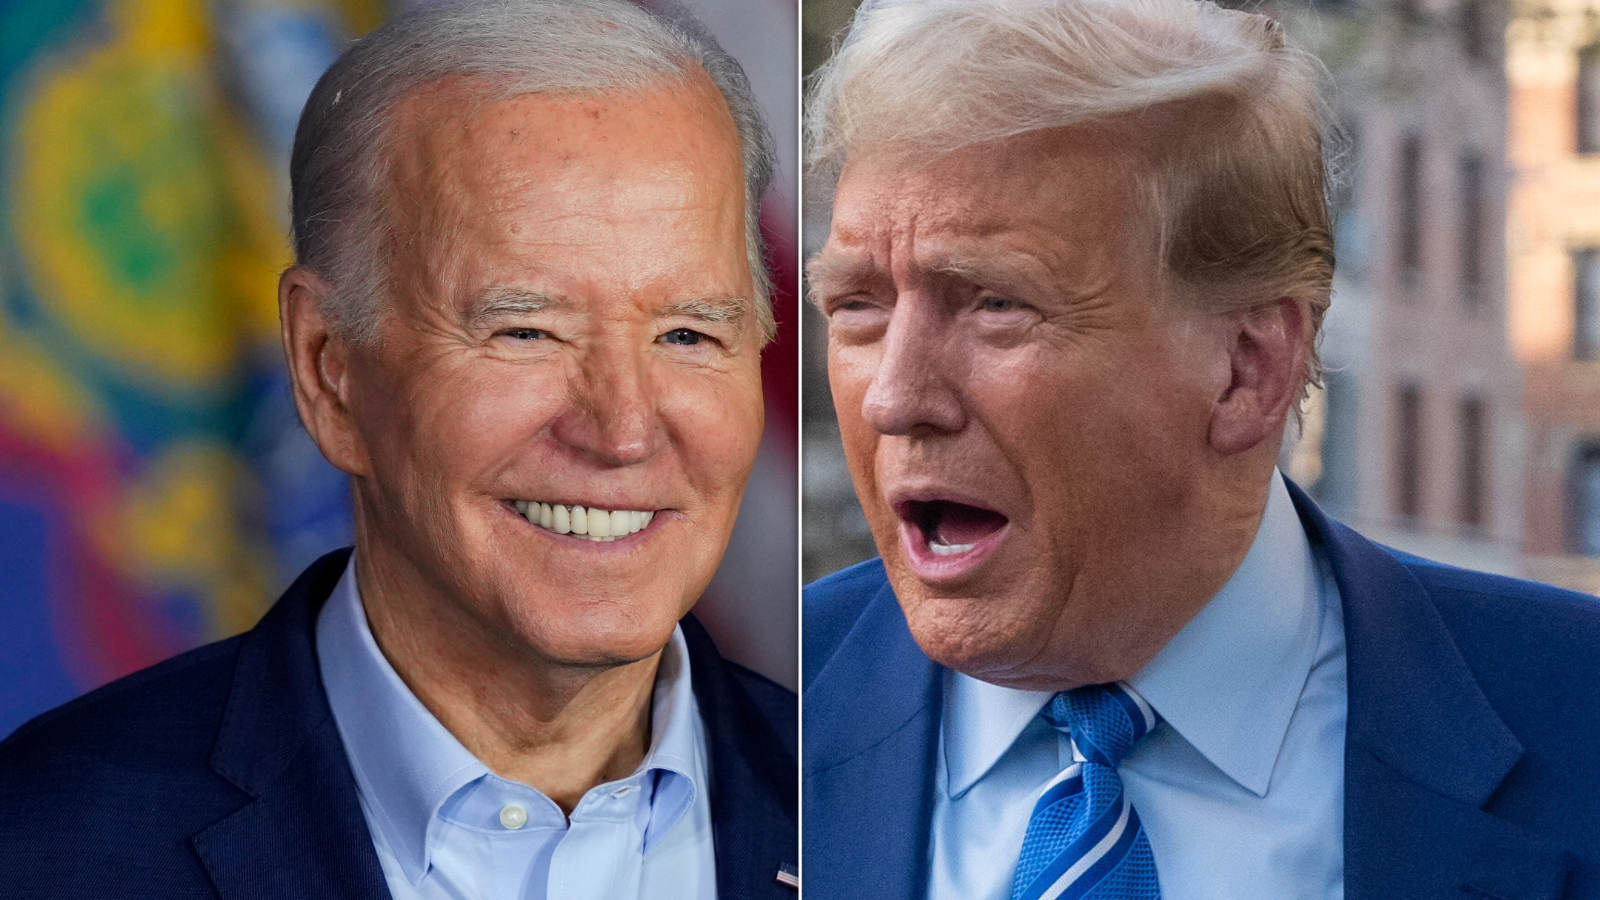 joe biden taunts trump over truth social stock plunge as crowd laughs